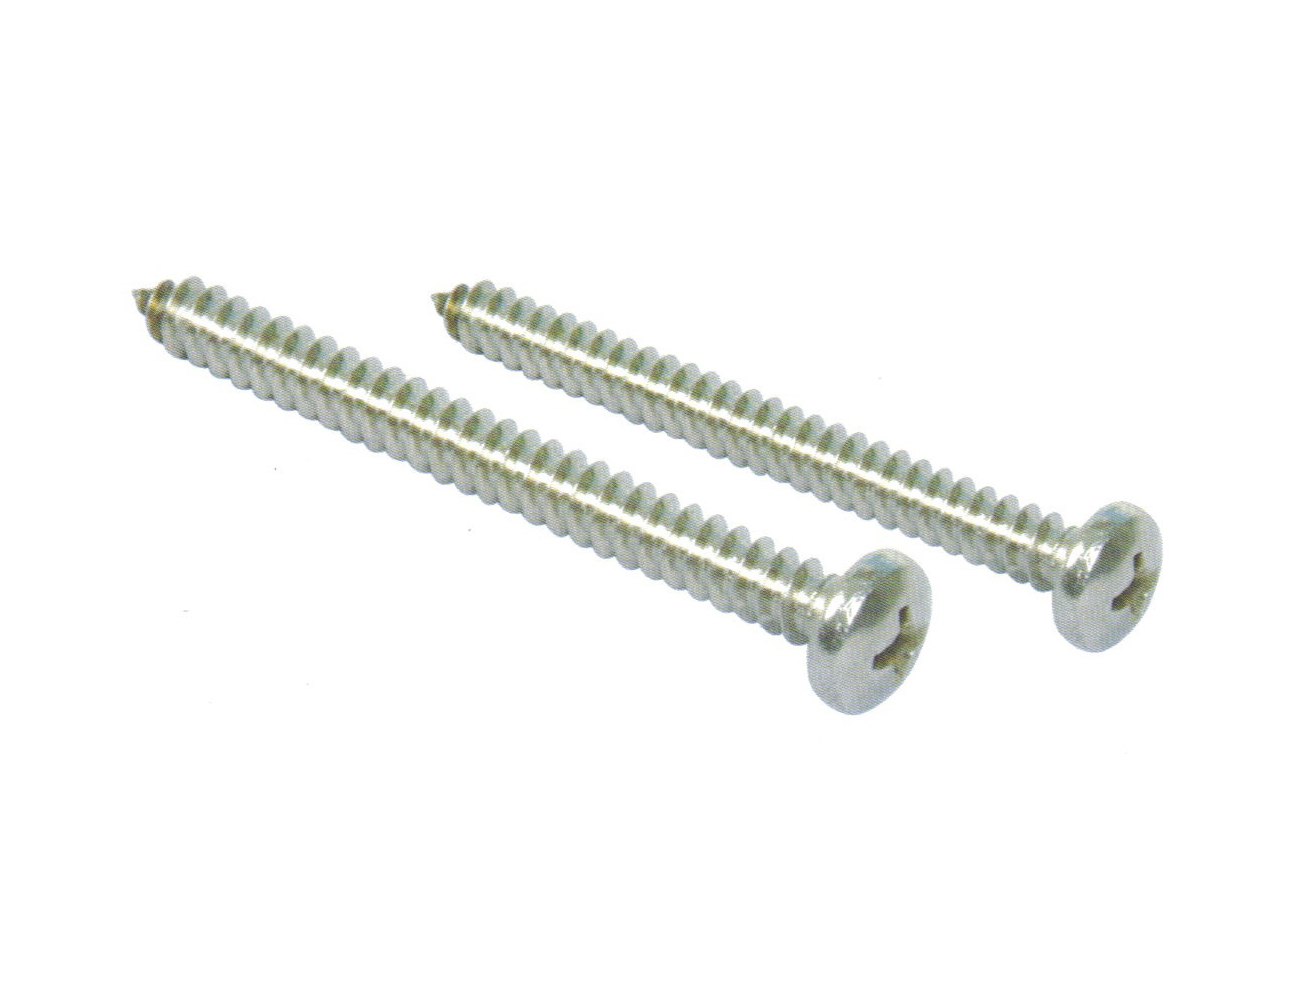 Cross recessed pan head tapping screw, DIN7981